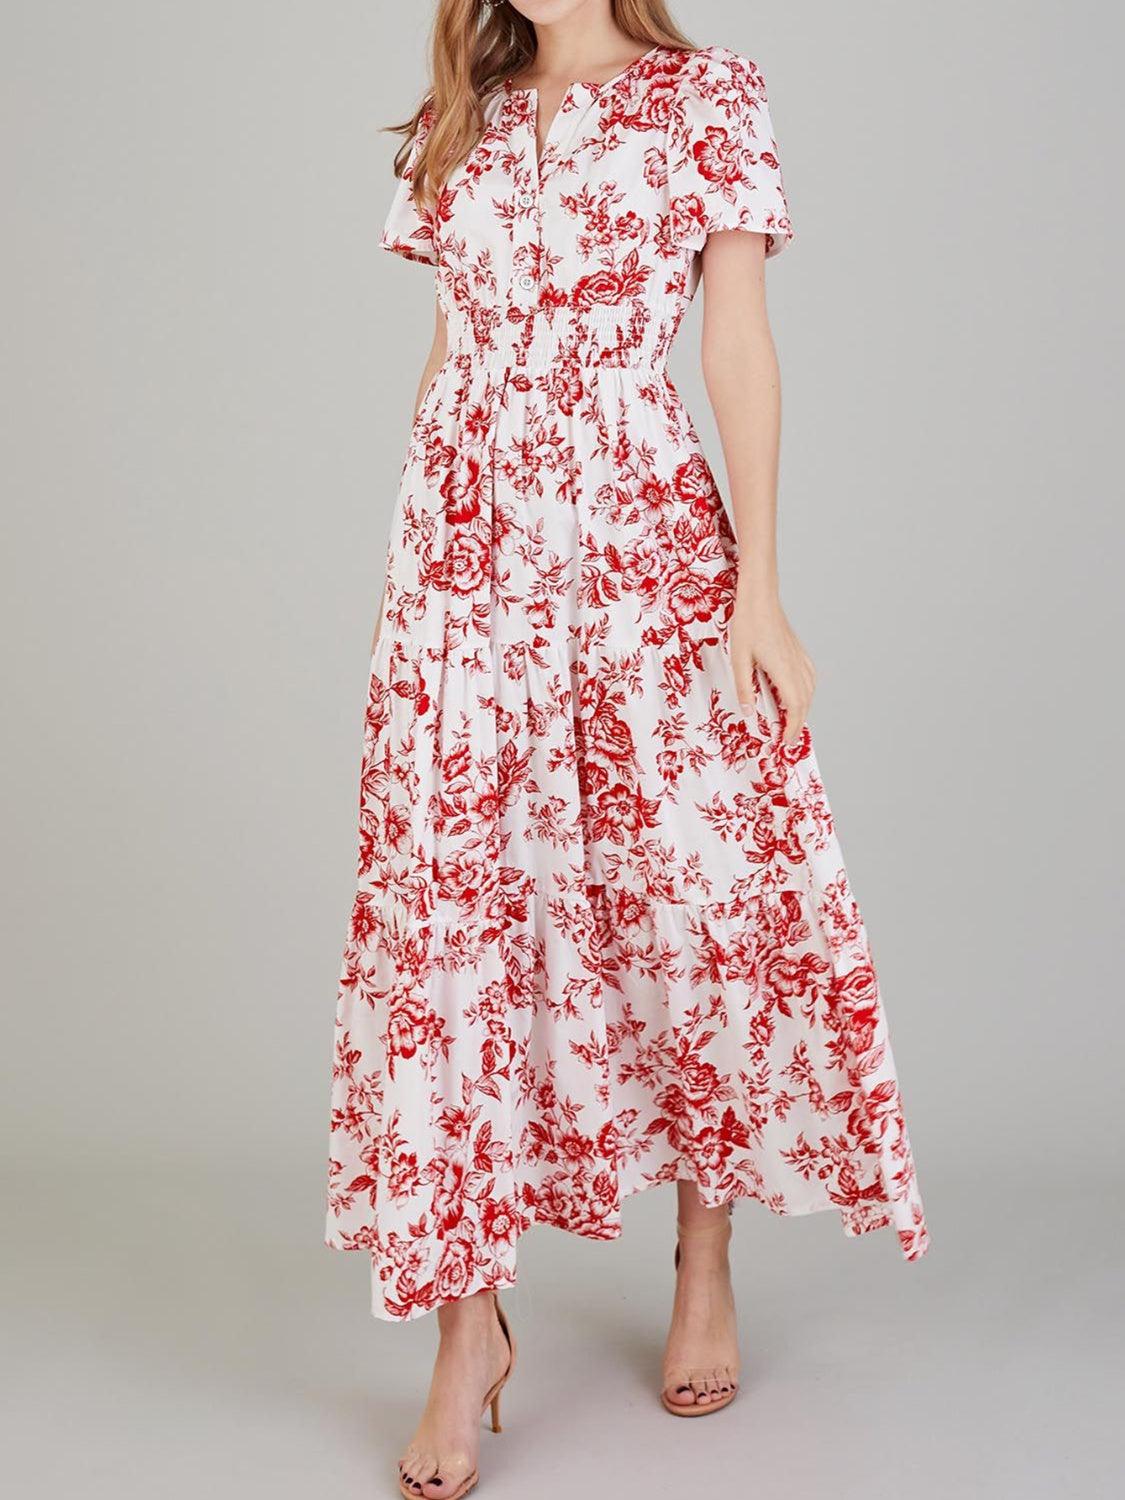 Women's Dresses Tiered Floral Notched Short Sleeve Dress